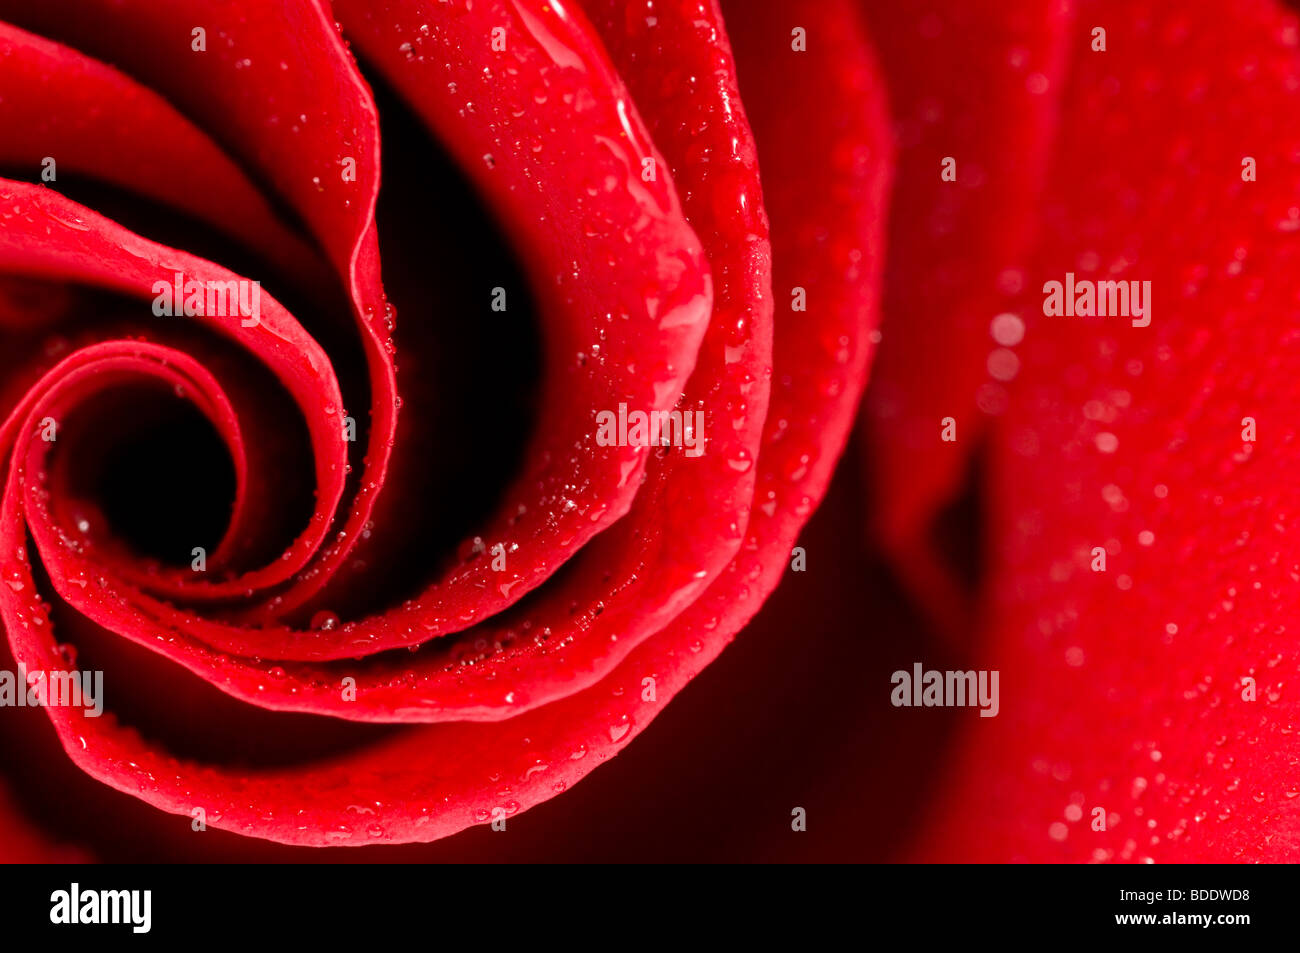 red rose Stock Photo